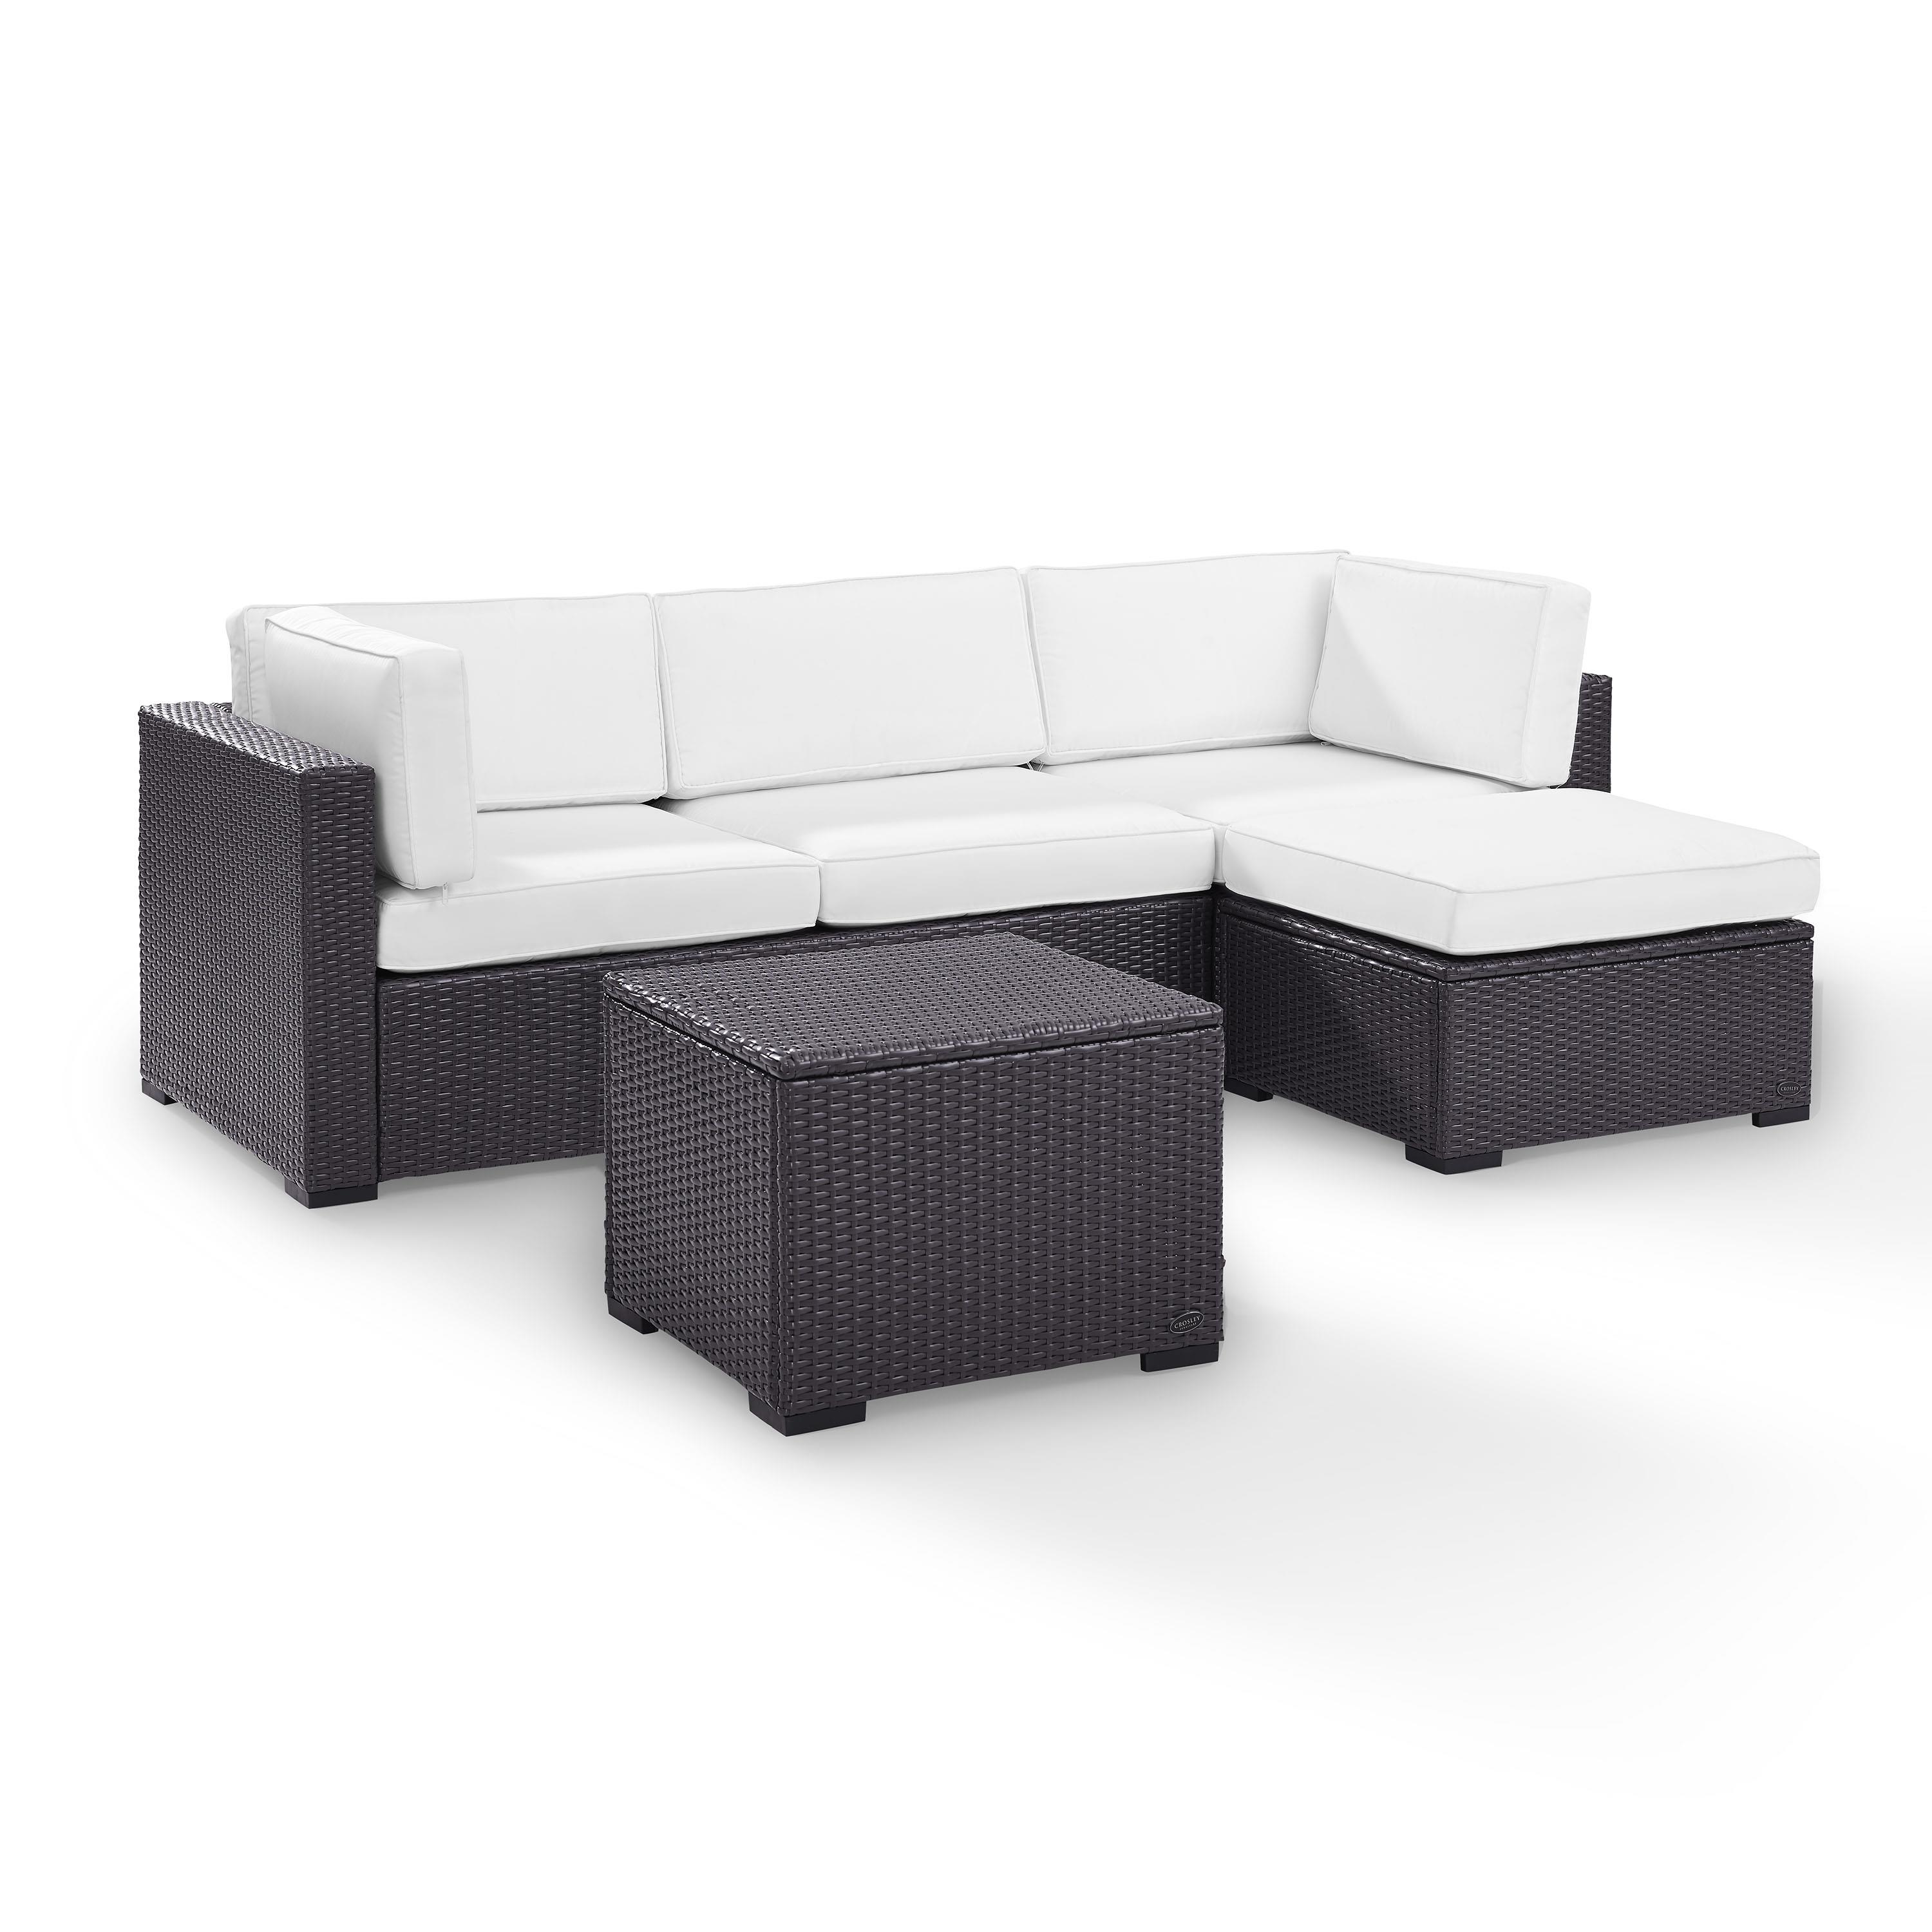 Crosley Furniture Biscayne 4 Piece Metal Patio Sectional Set in Brown/White - image 2 of 4